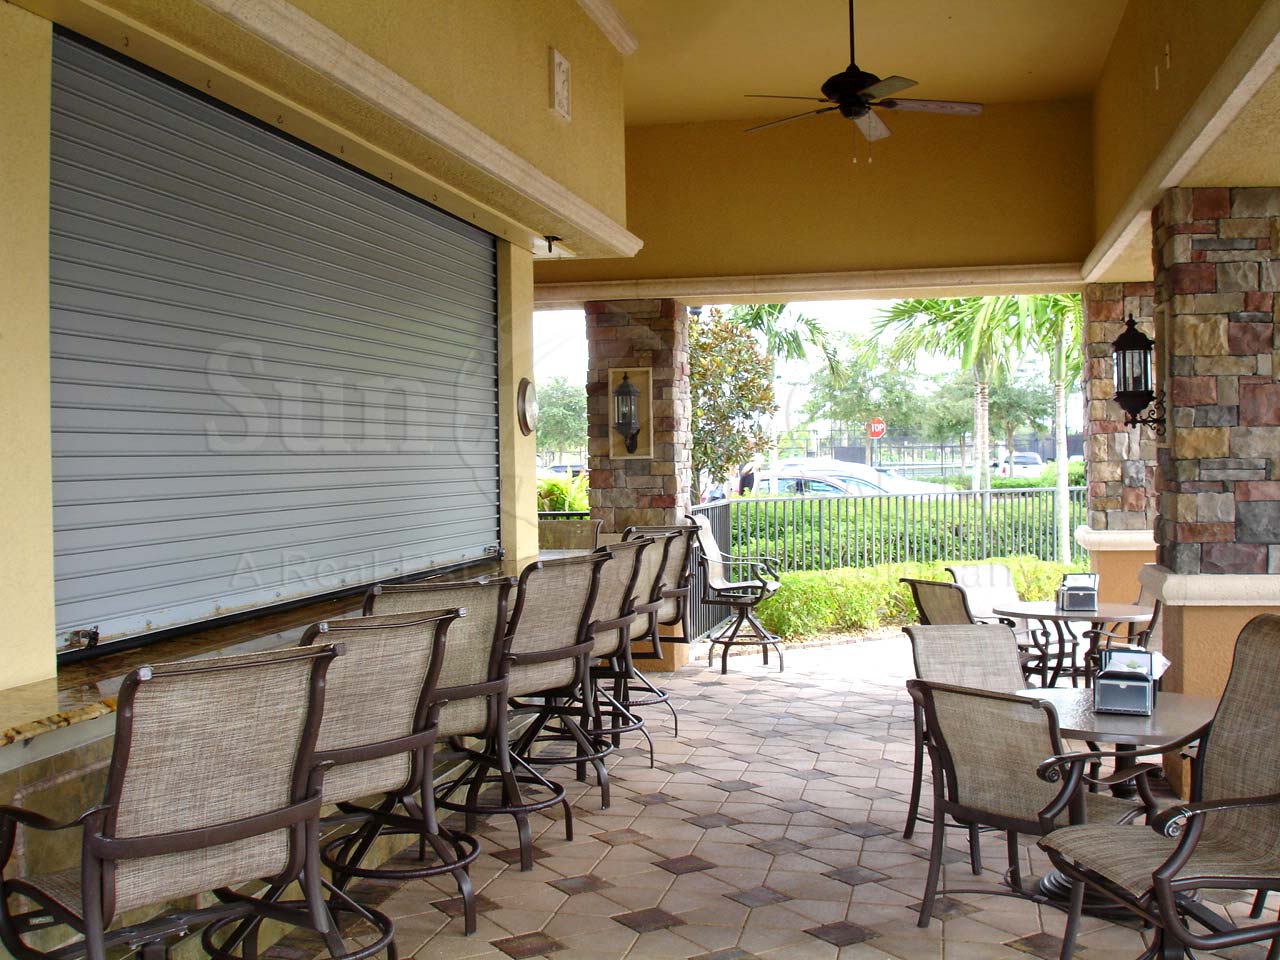 HERITAGE BAY Golf and Country Club pool area and bar